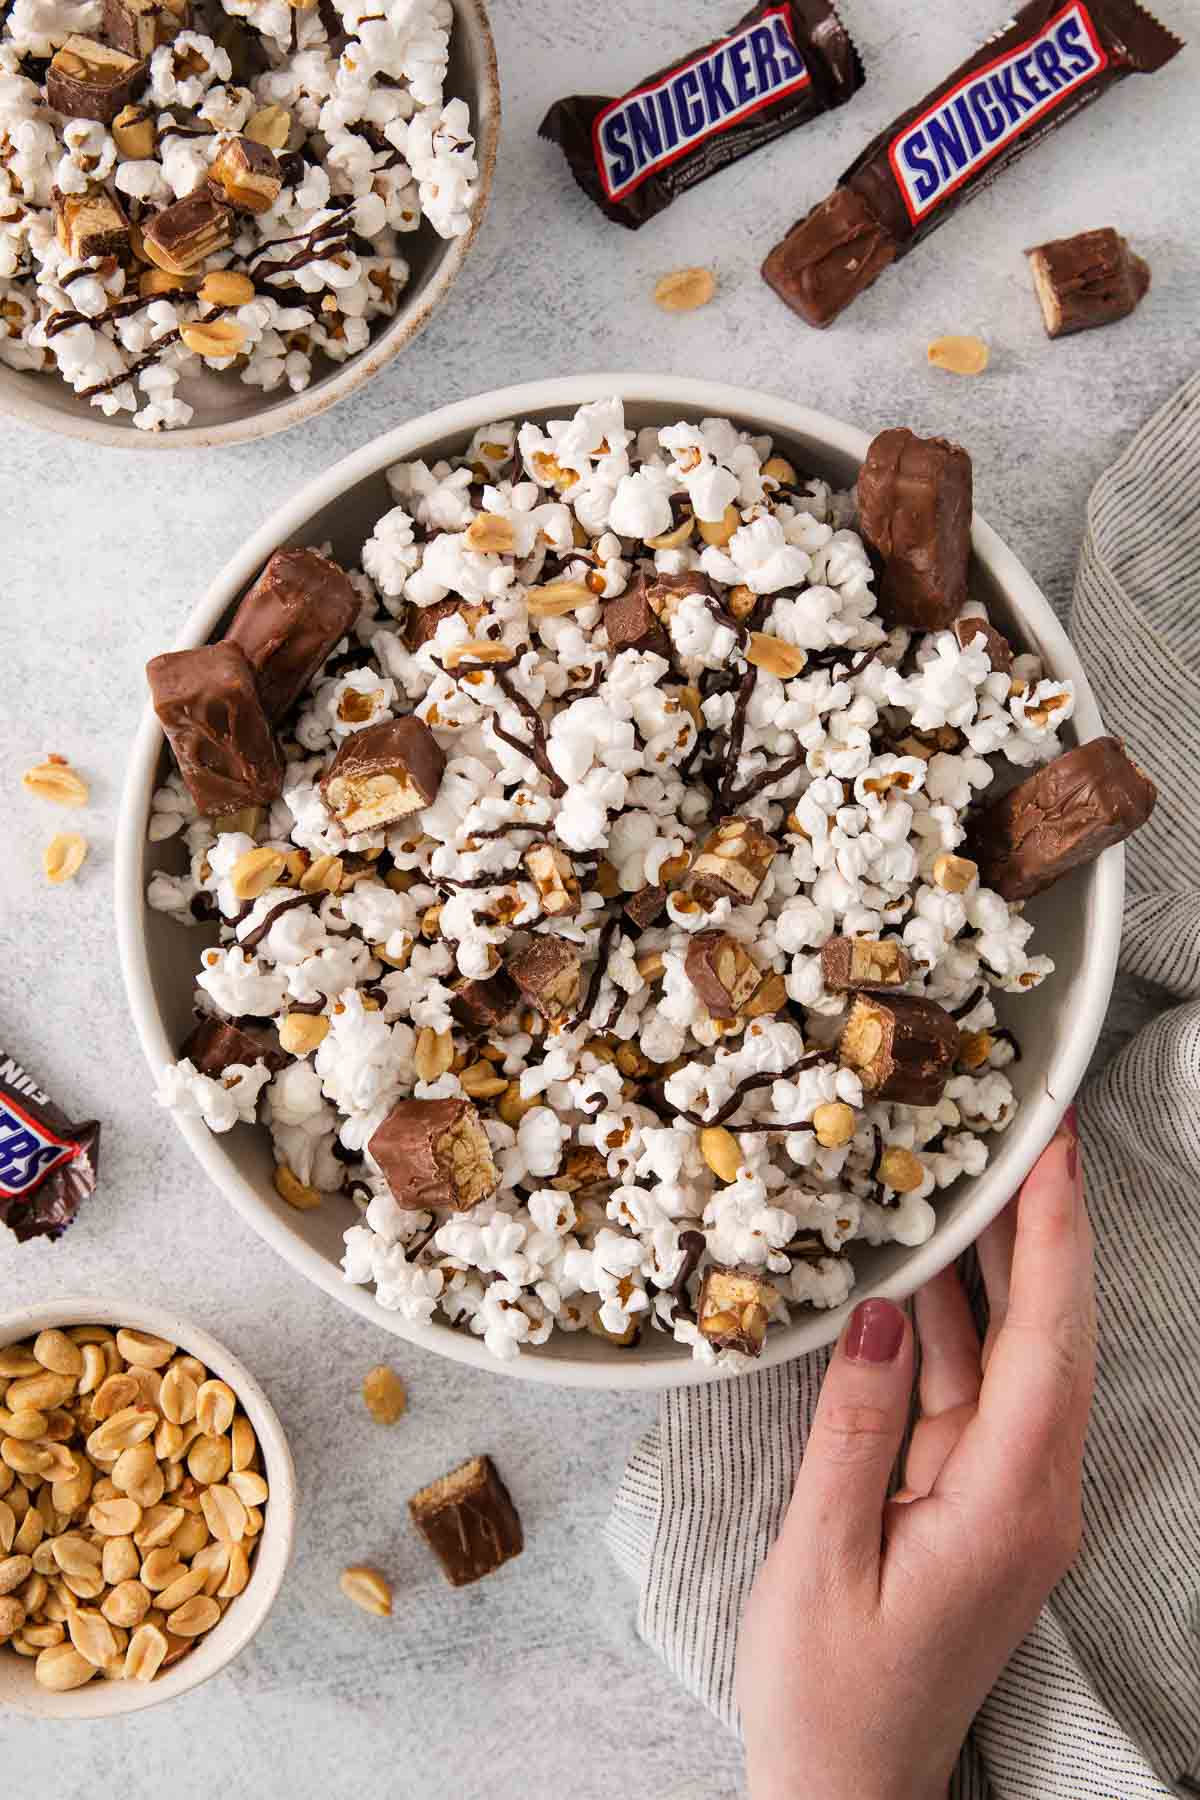 Snickers popcorn in a bowl with a hand touching the bowl